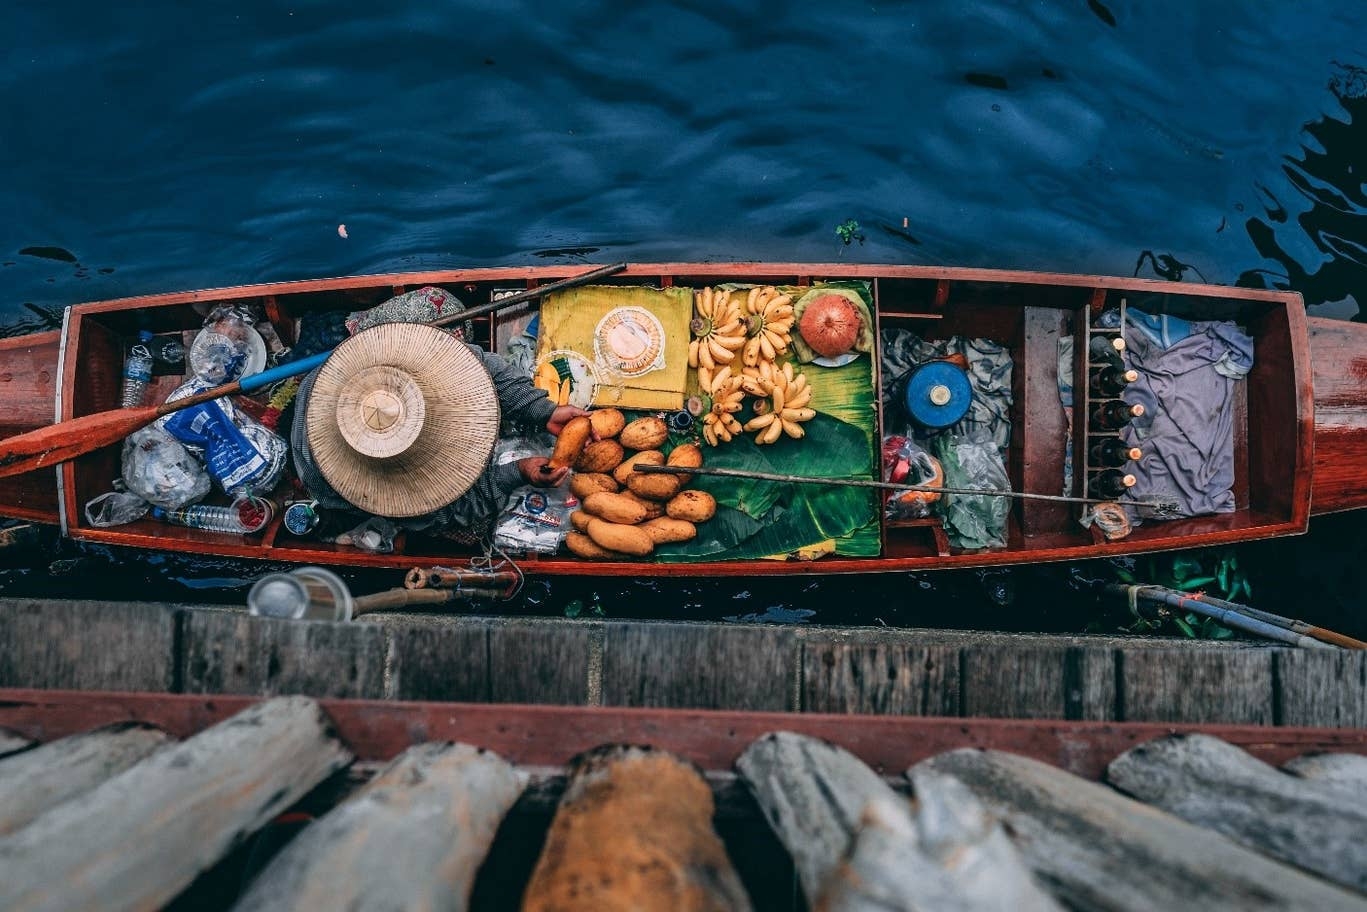 vietnamese sweet soup hits worlds top 23 stunning travel images